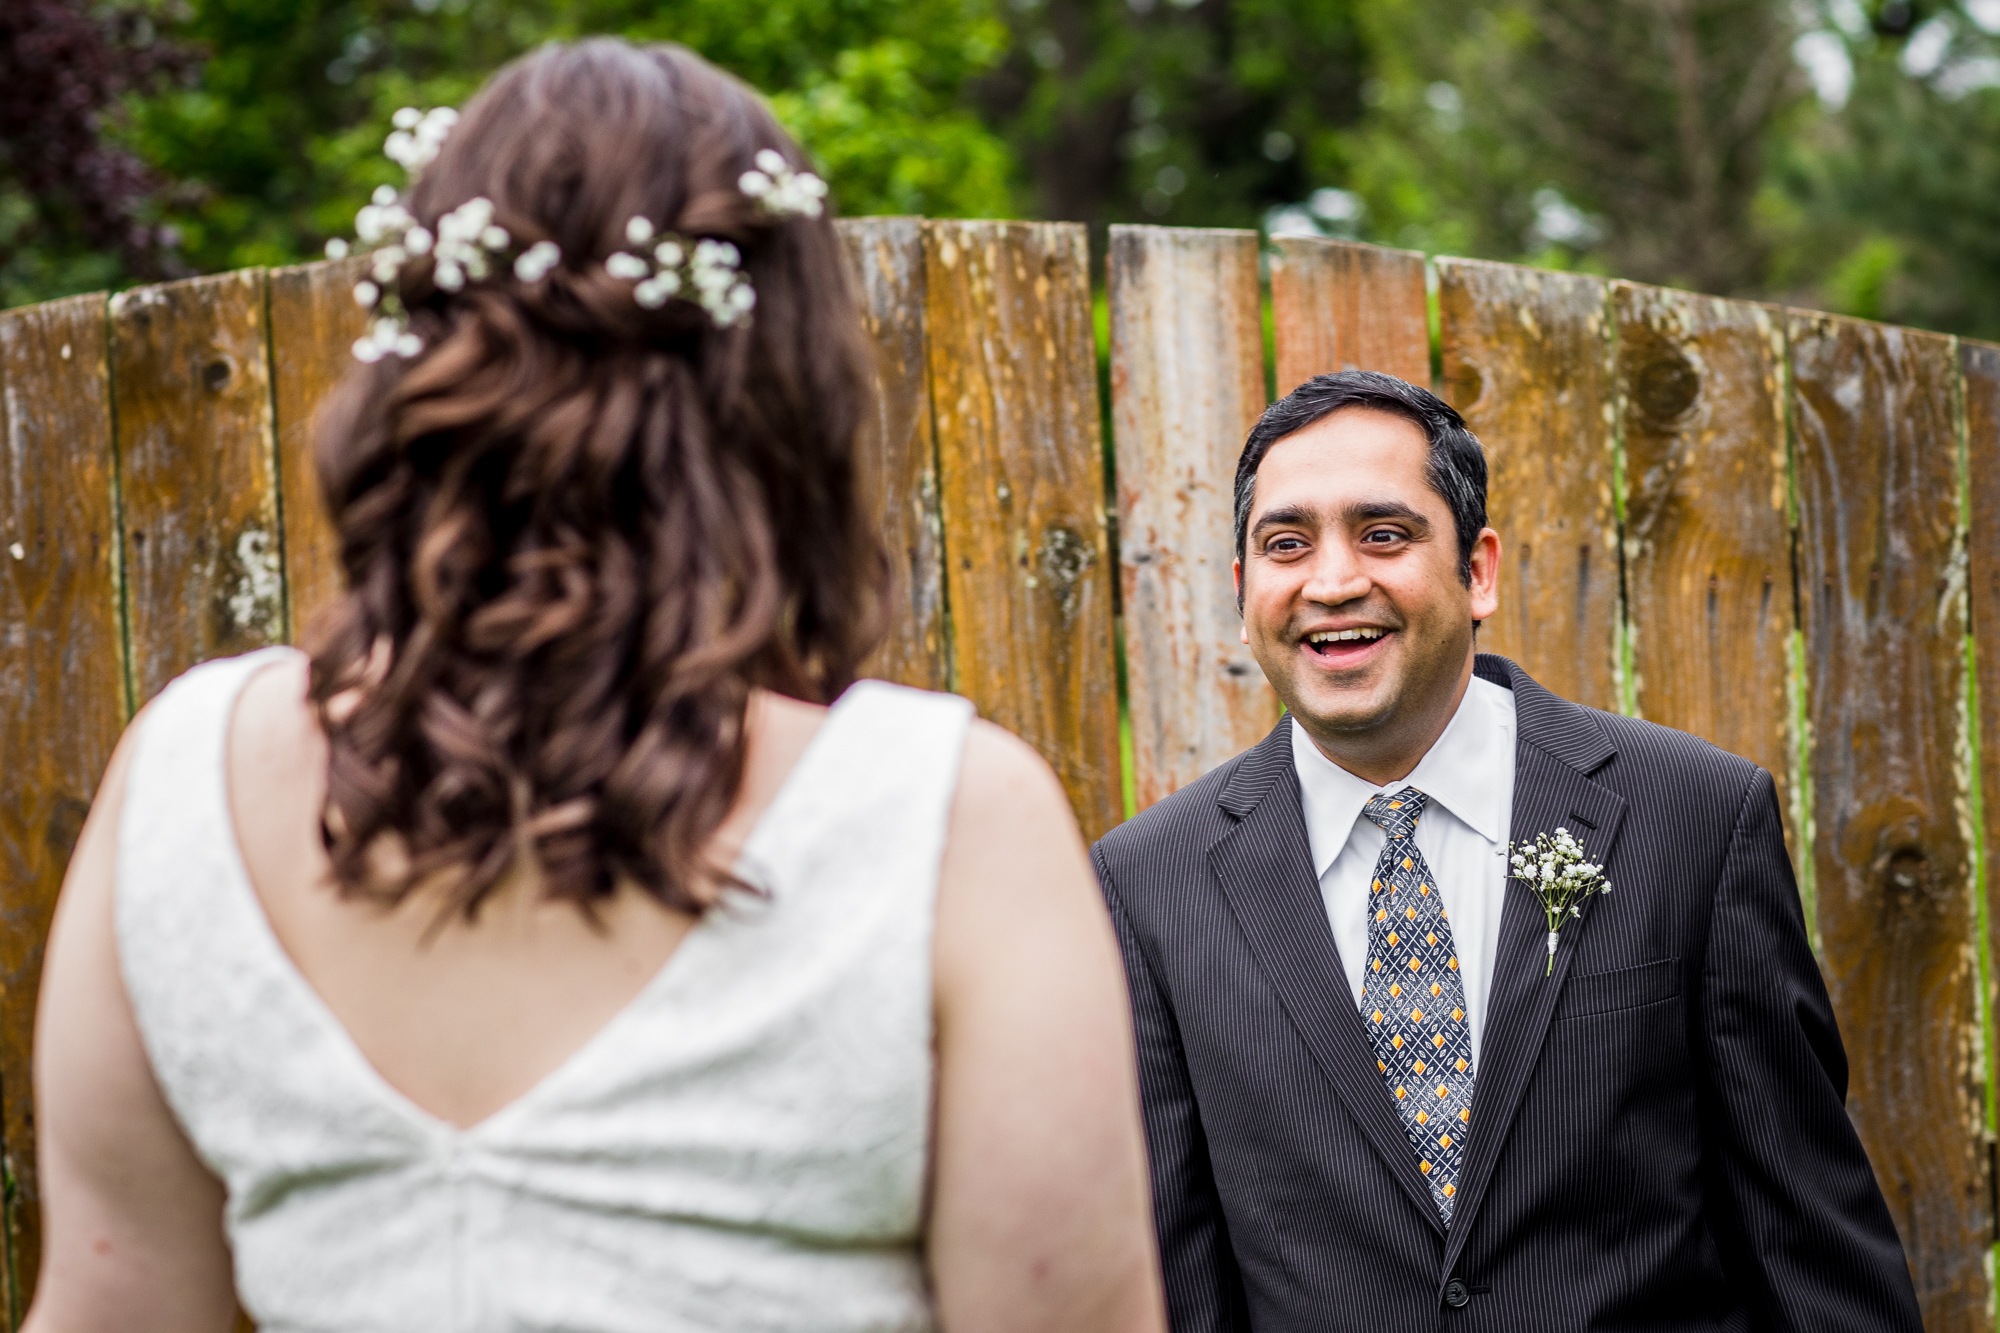 A groom shares a first look with his bride at a backyard wedding in Yorkville, Illinois